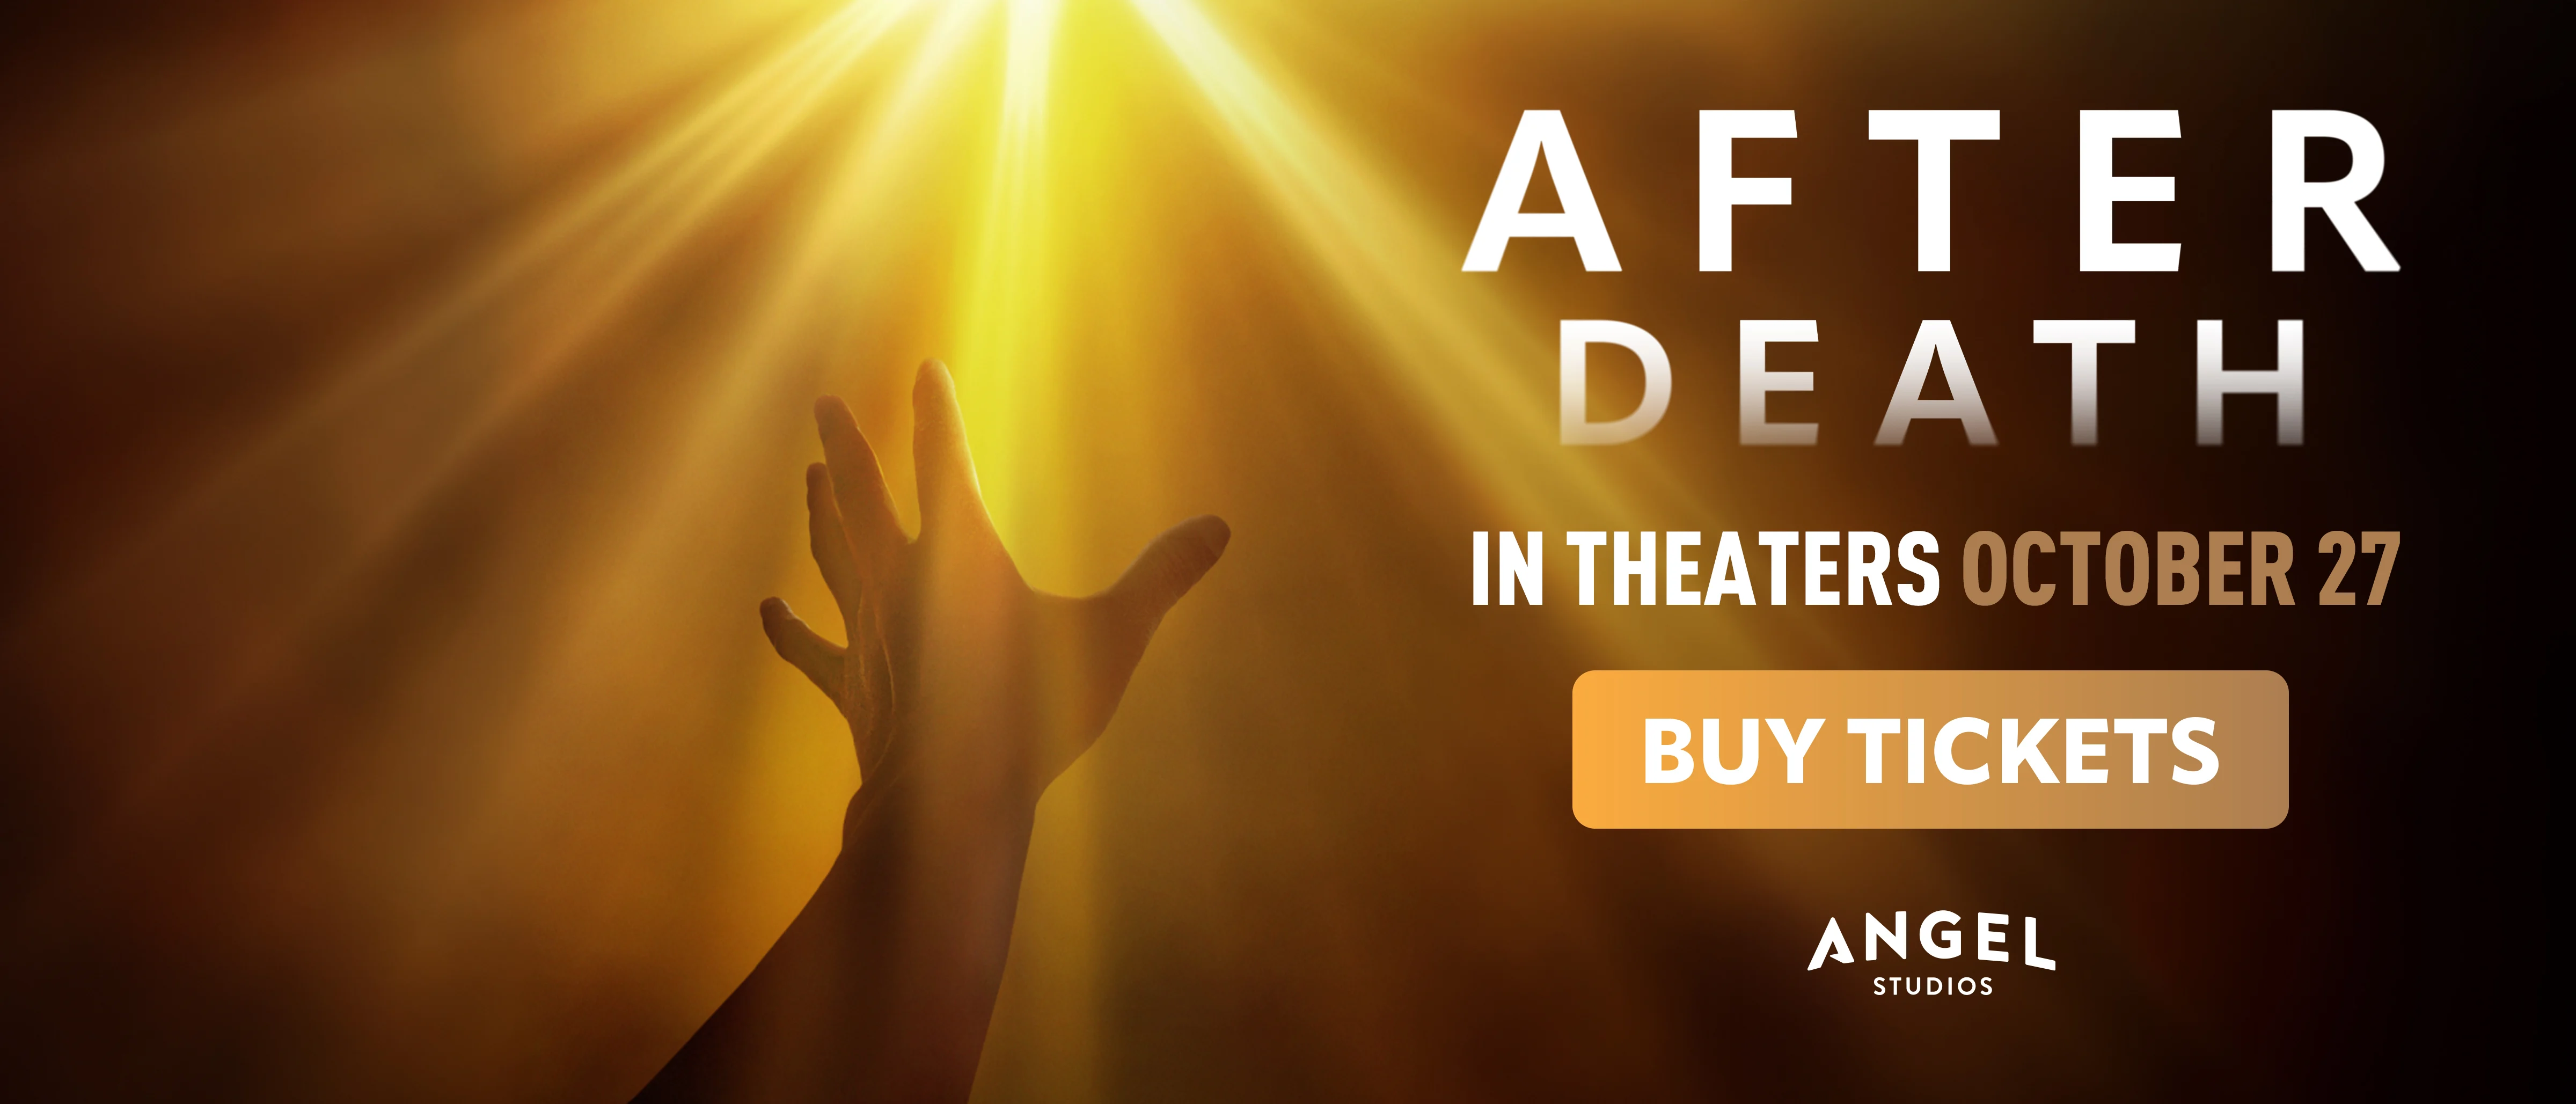 How To Book a Private Theater for After Death